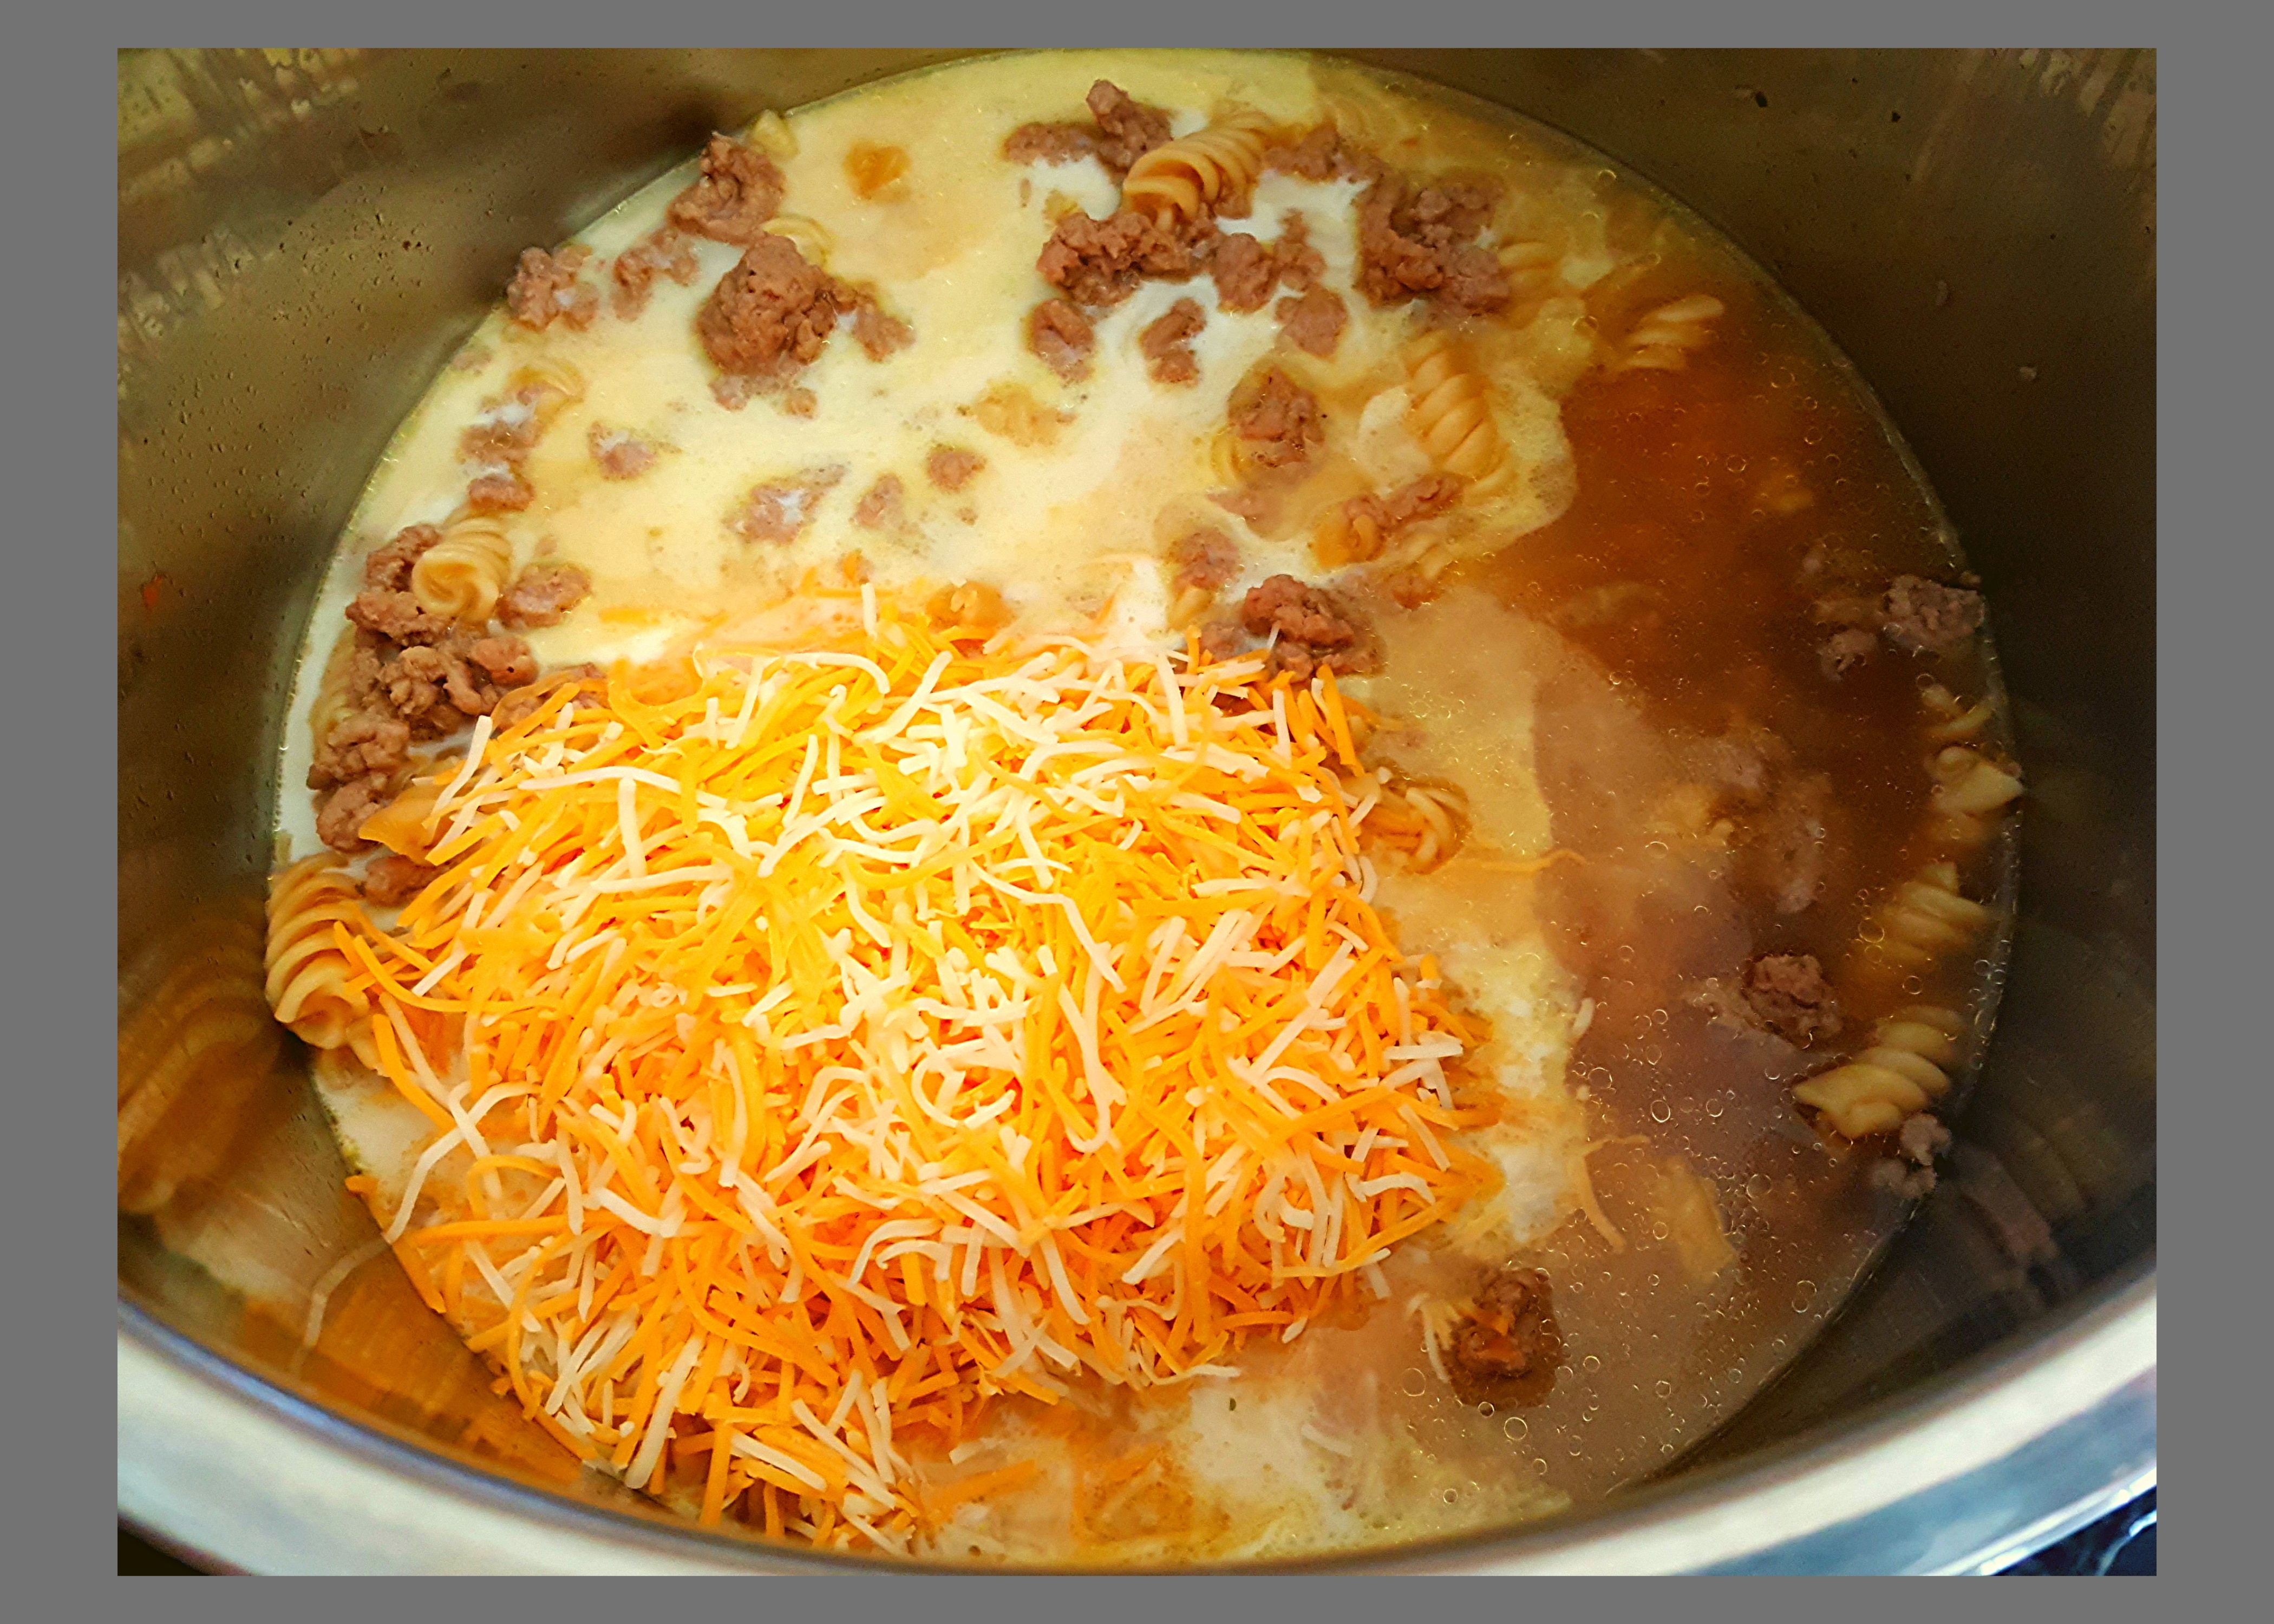 The inside of an Instant Pot filled with a cup of shredded cheese on top of cooked ground turkey and spiral noodles that needs to be stirred.